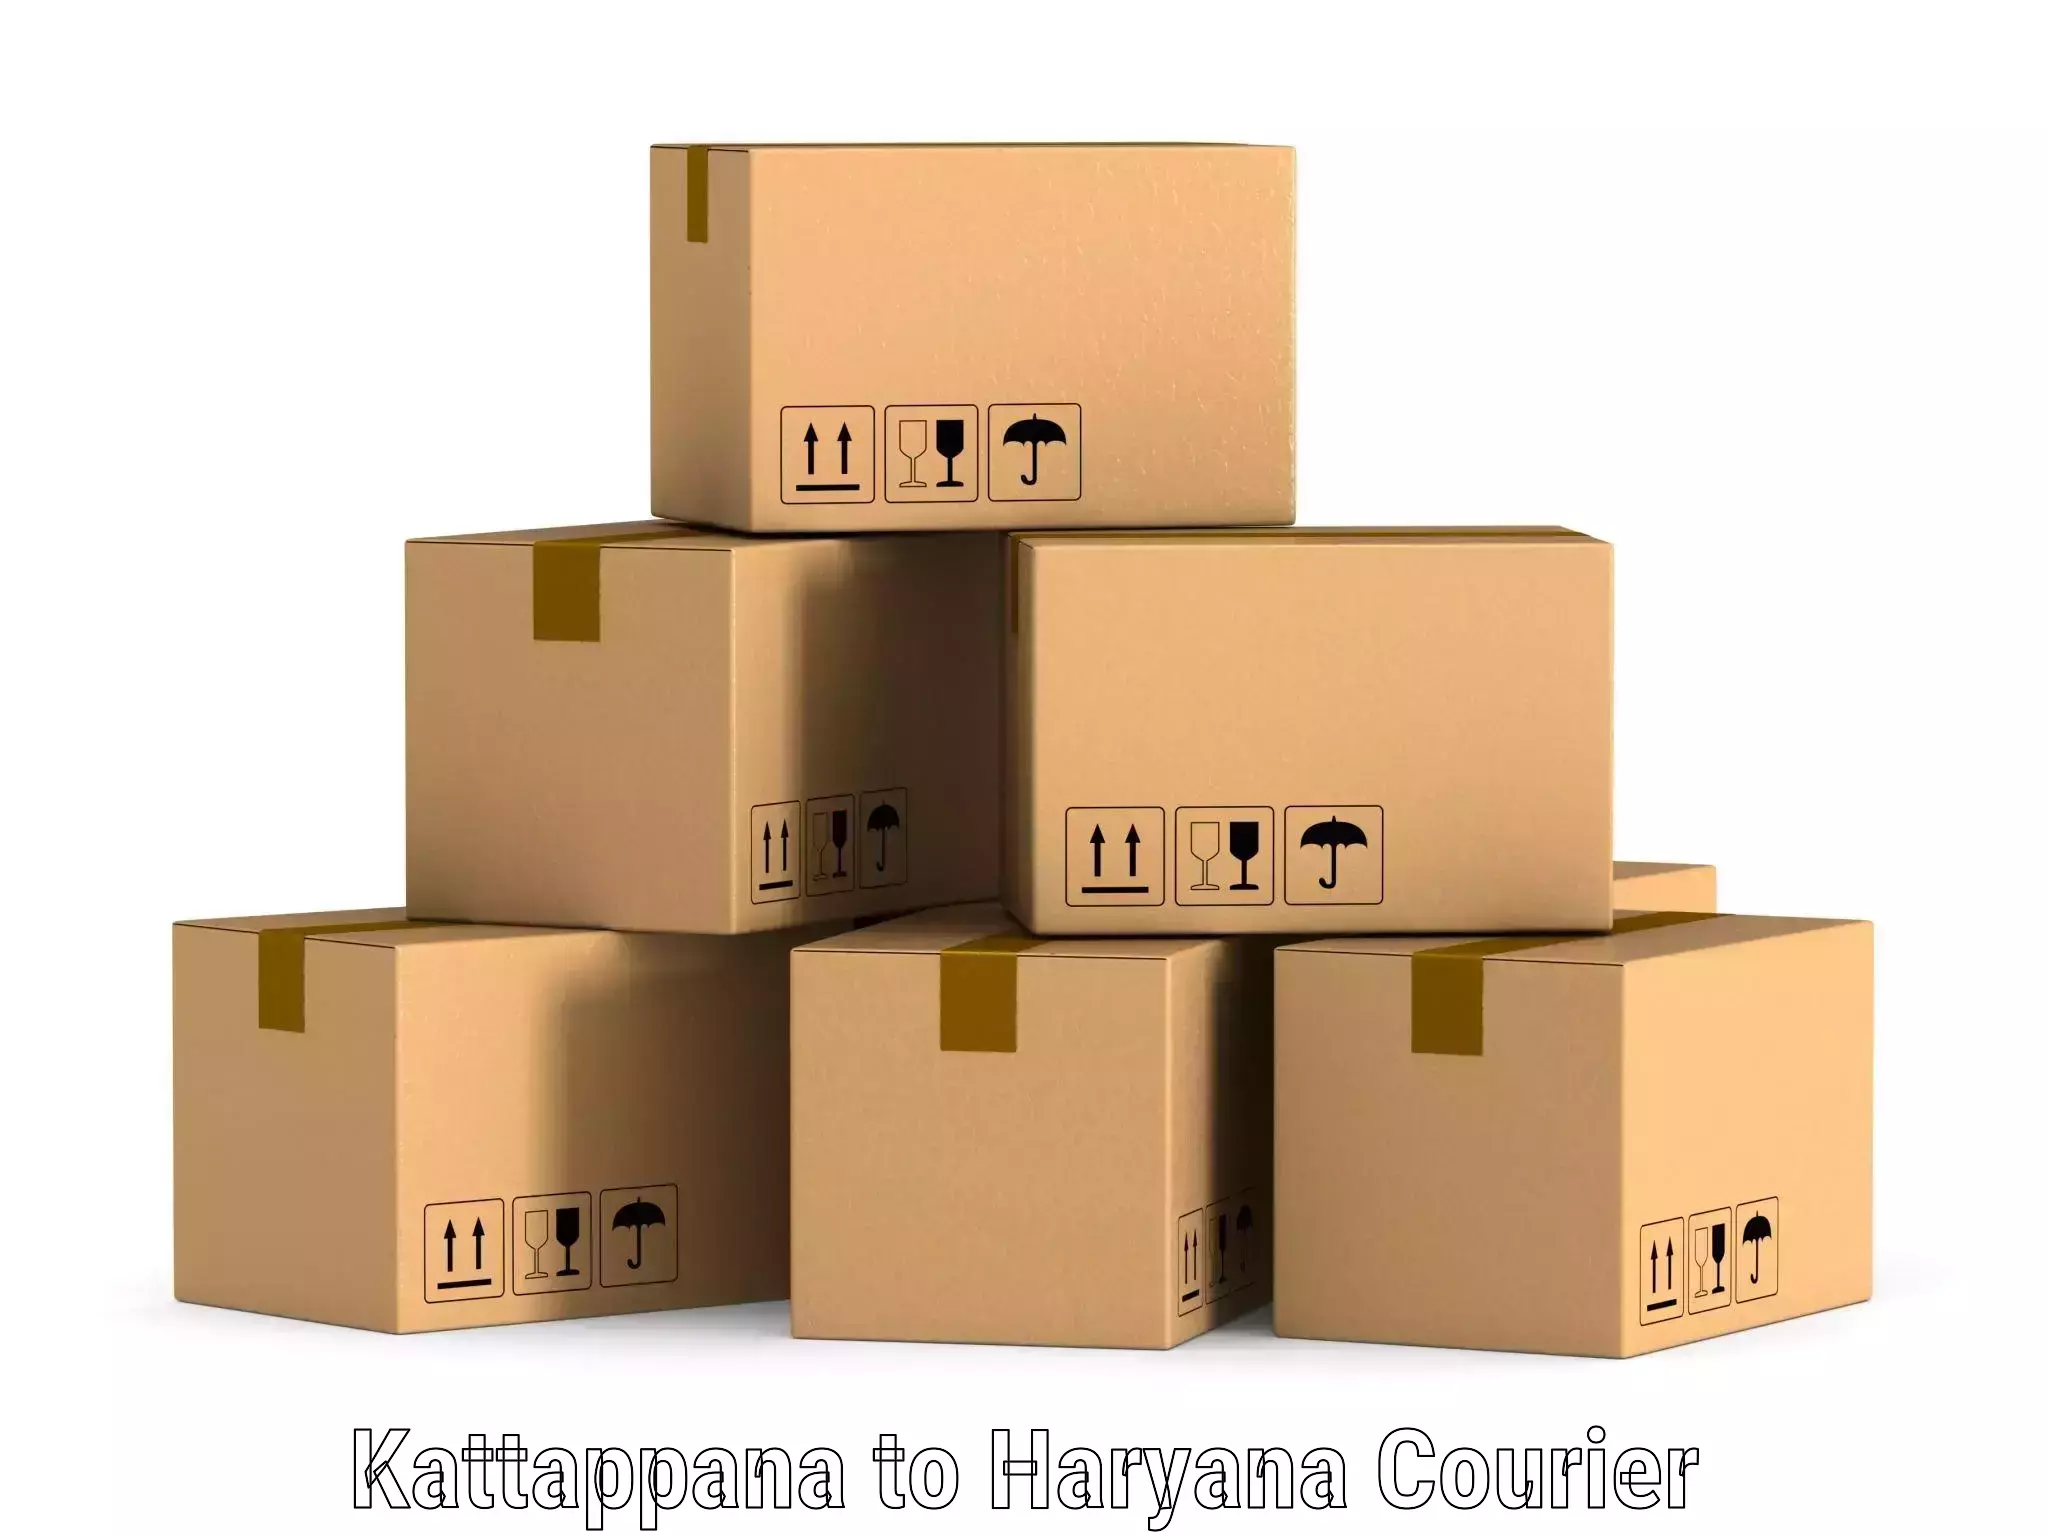 Flexible delivery schedules Kattappana to Haryana